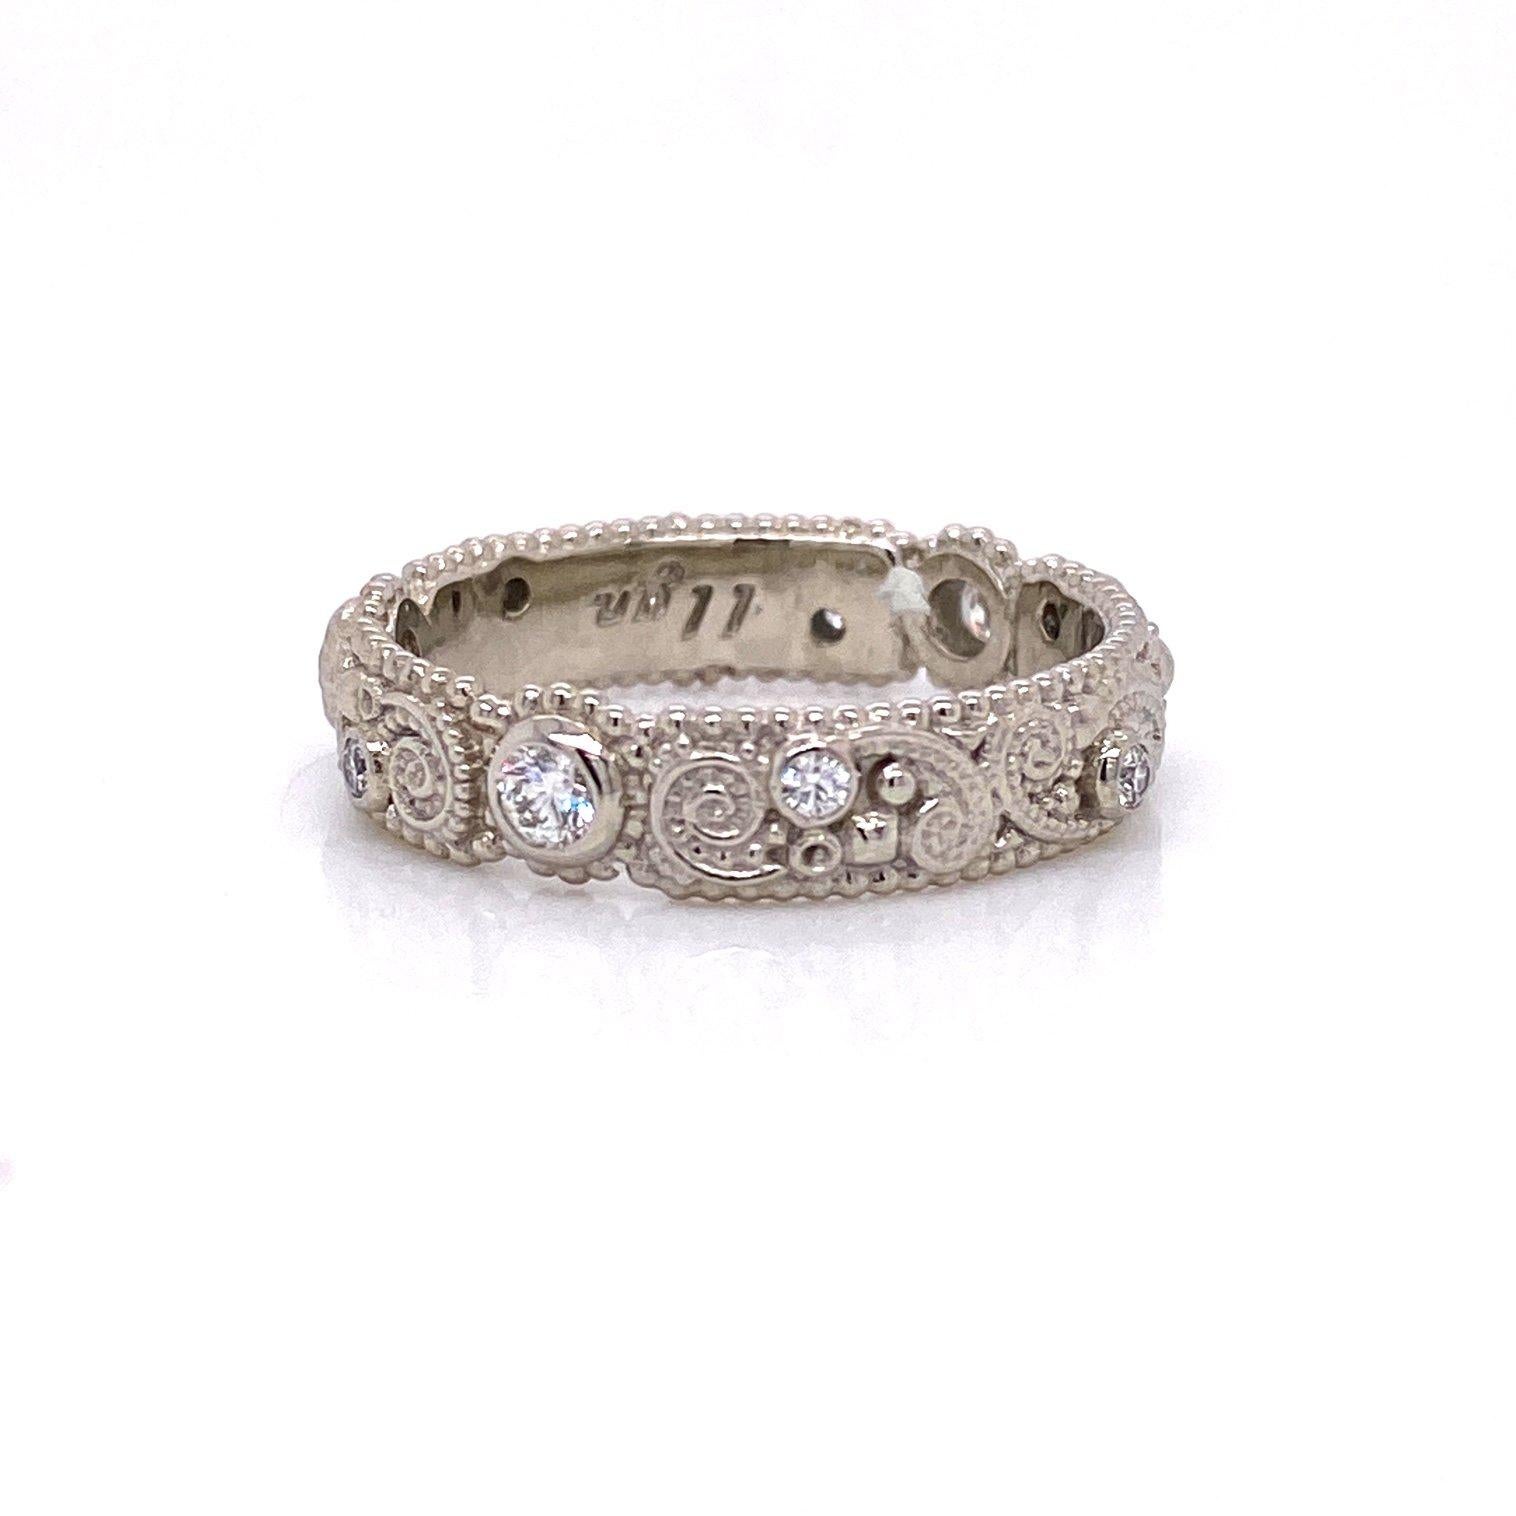 An 18k white gold llyn Band bezel set with round full cut white diamonds 0.25 total carat weight VS clarity F color. Designed and made by llyn strong. Ring size 7